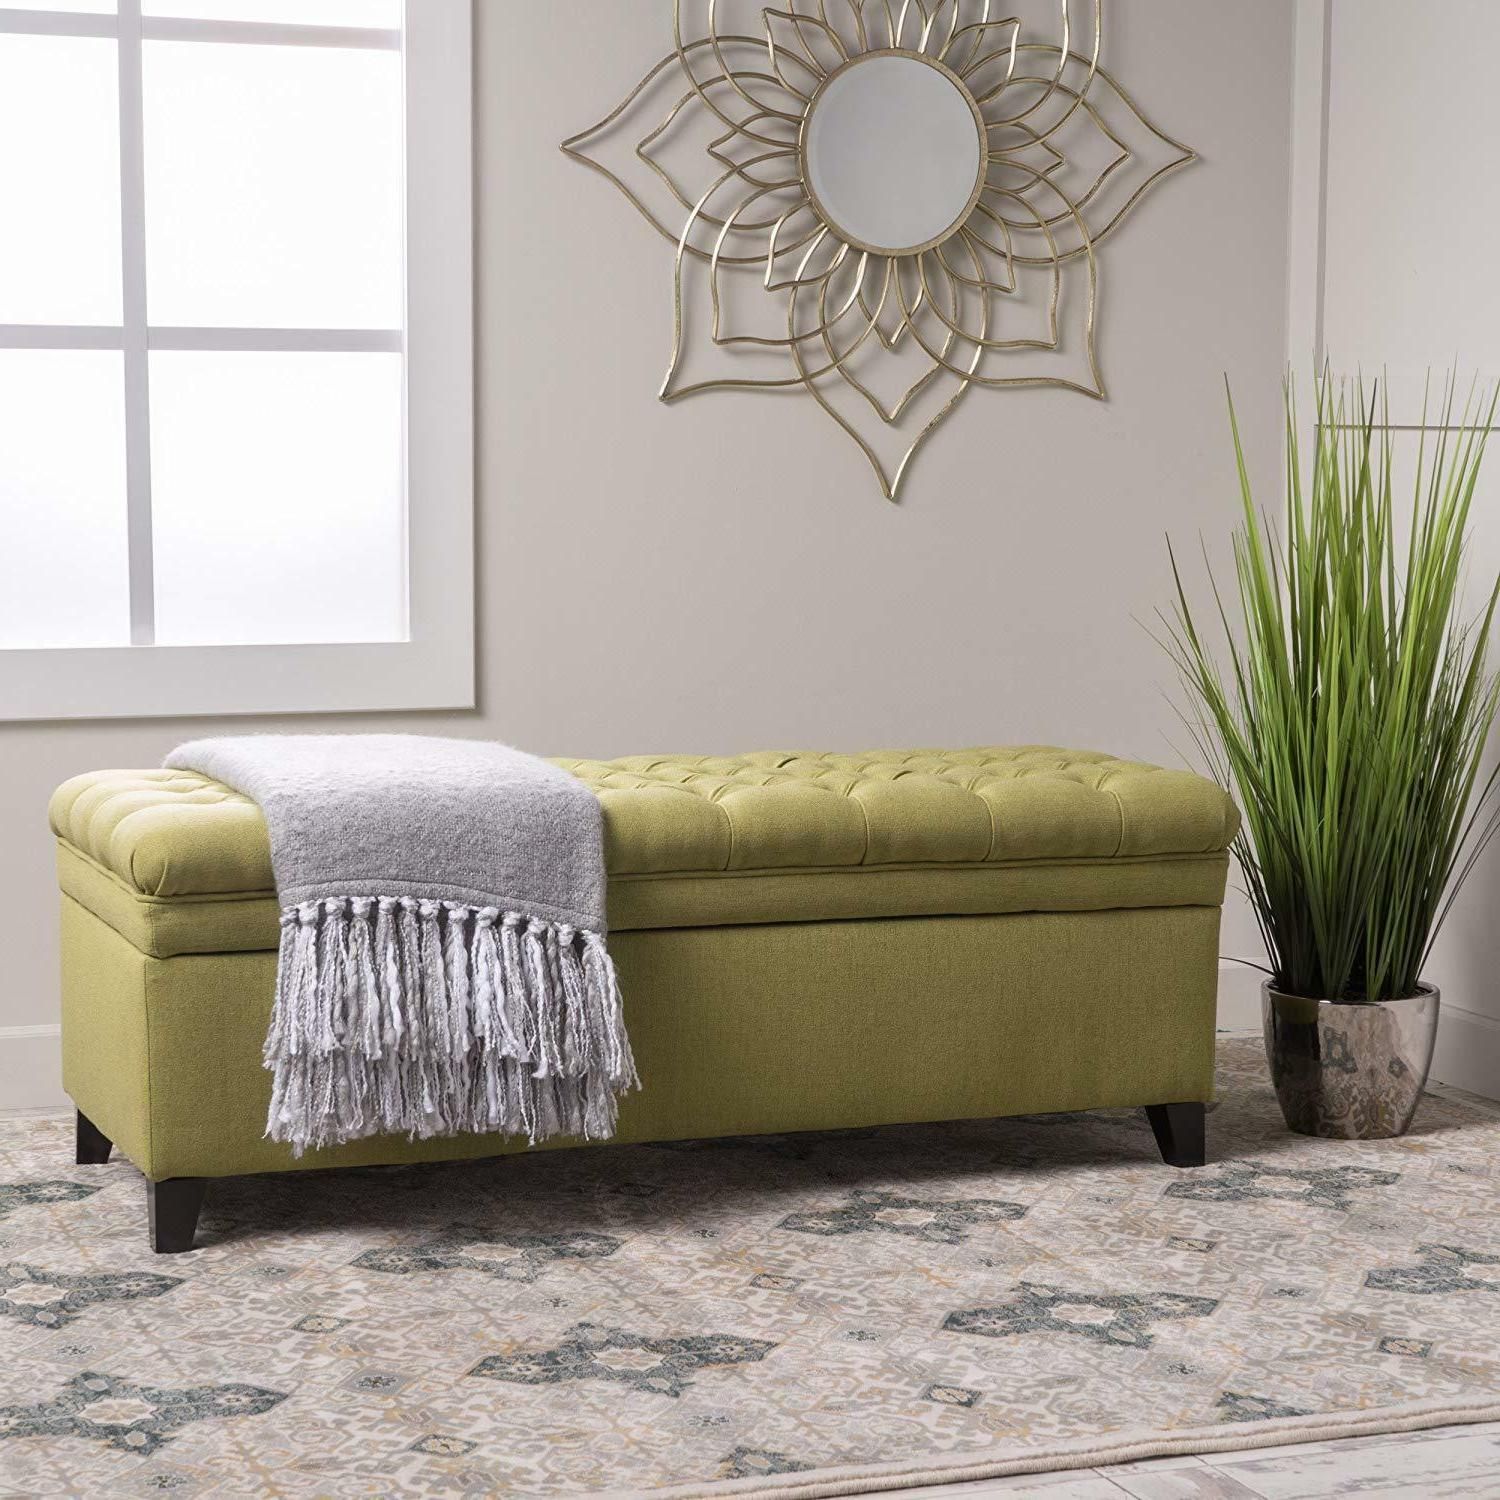 Furniture Tufted Fabric Storage Ottoman Bench For Living Throughout Fabric Tufted Storage Ottomans (View 8 of 20)